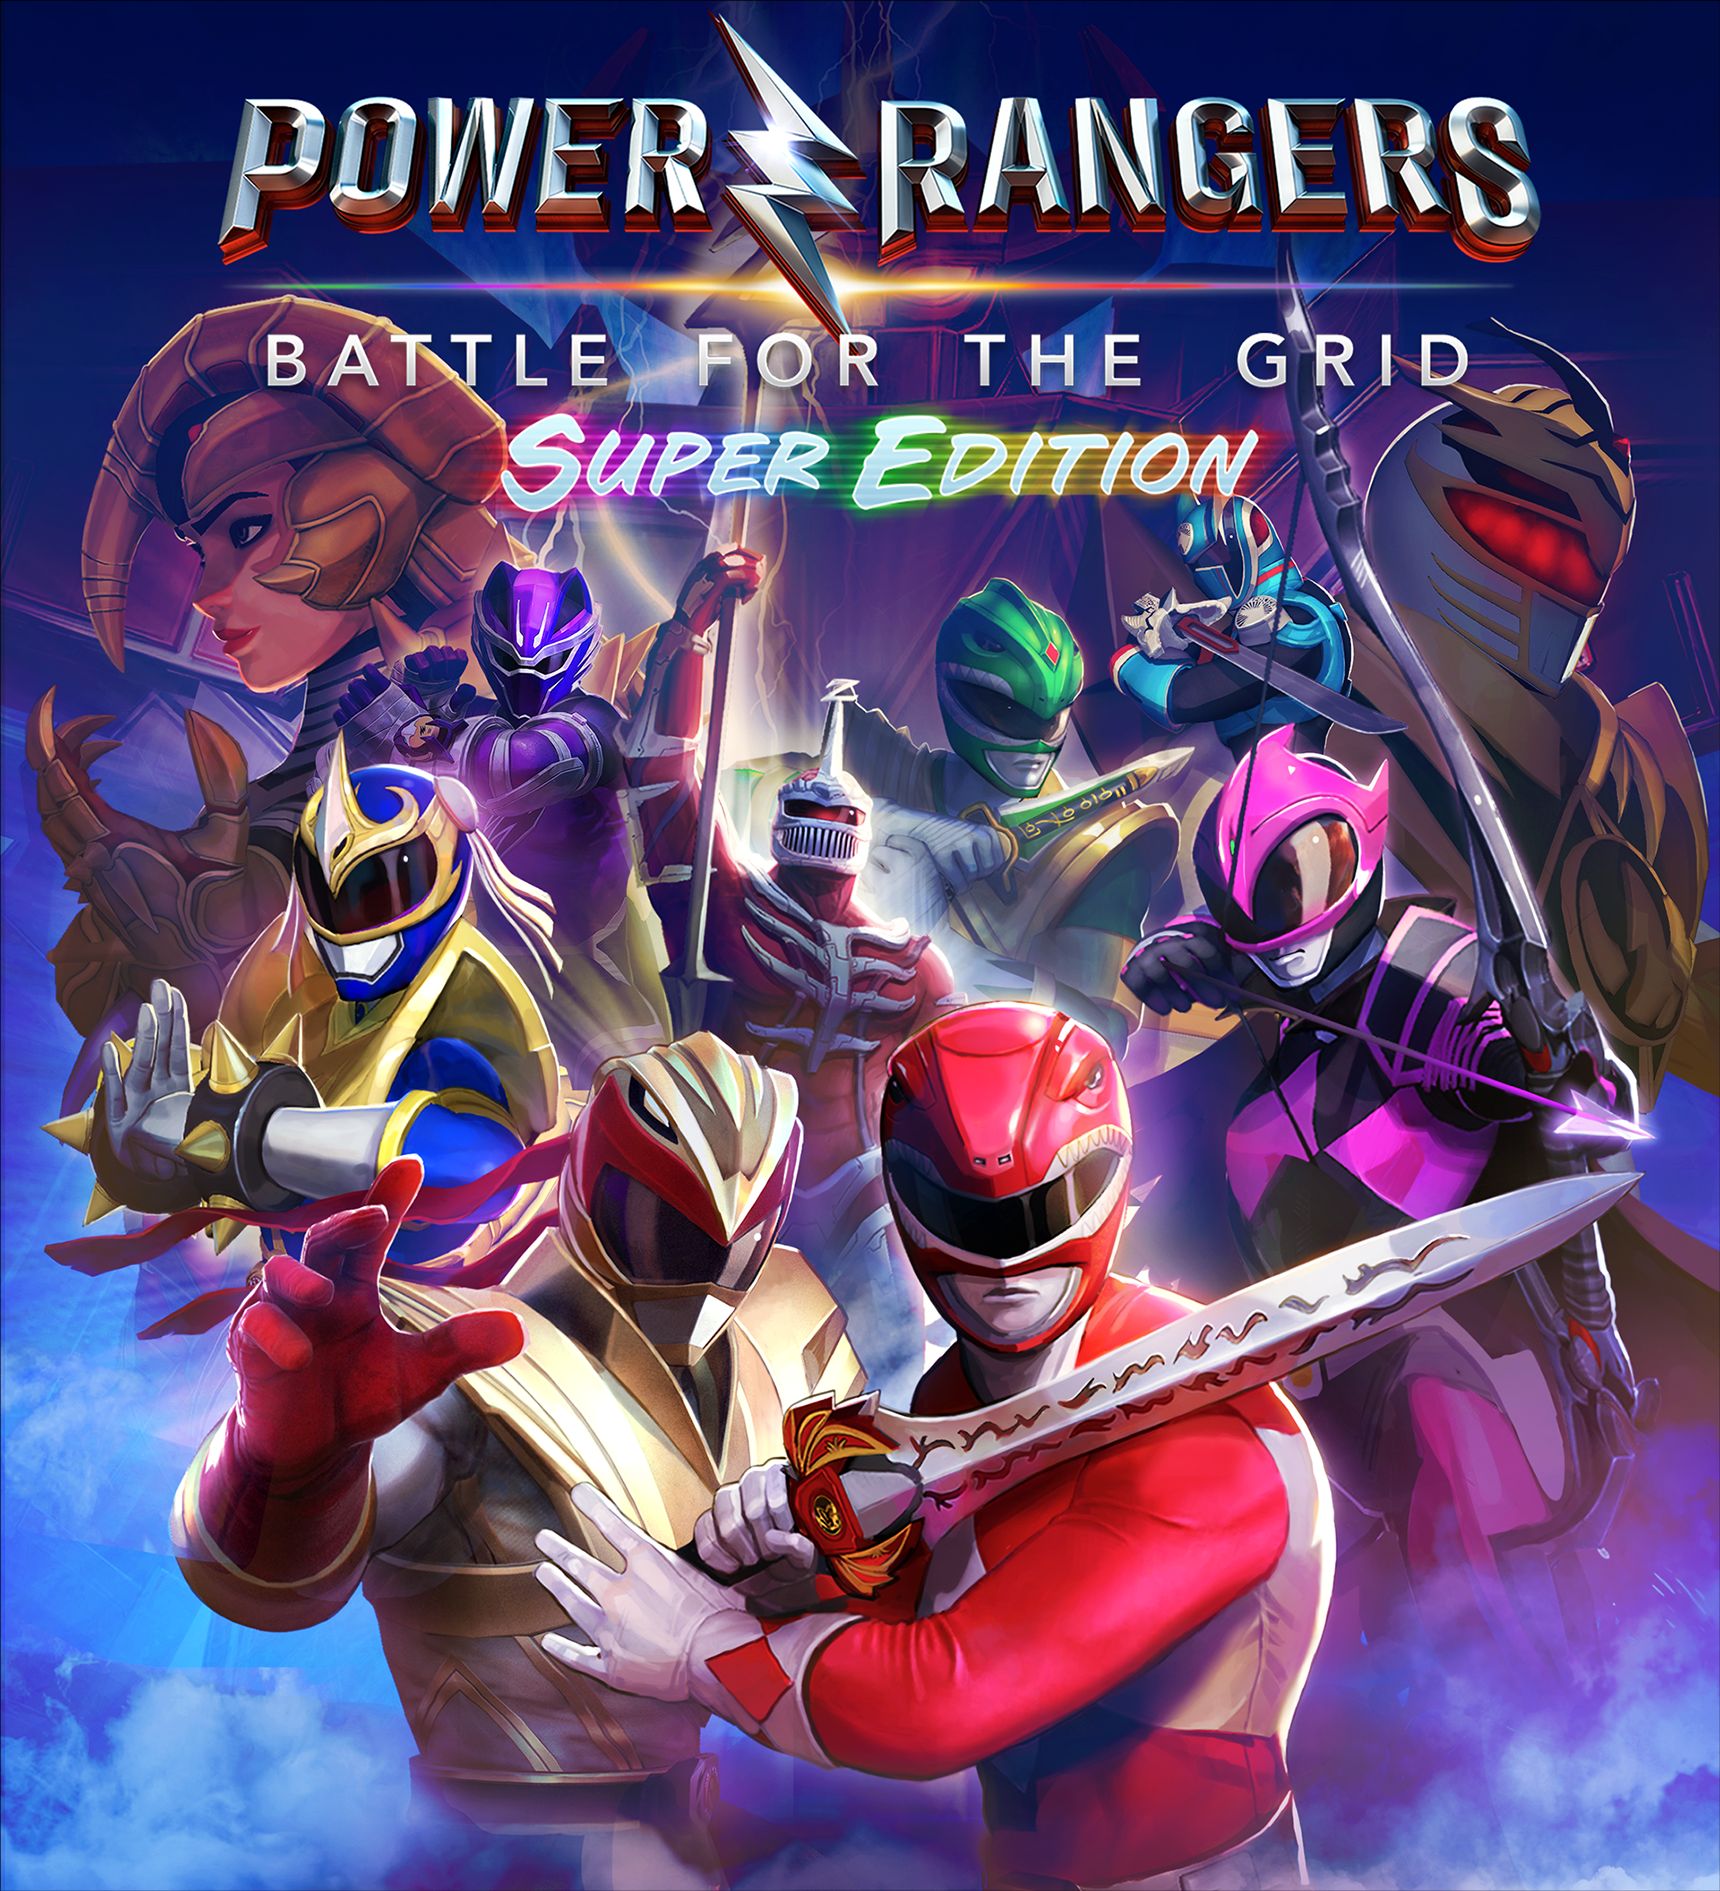 Power Rangers: Battle For The Grid on Twitter: "Launching 05.25.21, Power  Rangers: Battle for the Grid - Super Edition includes: ✓ The Game ✓ Season  Passes 1 - 3 ✓ The Street